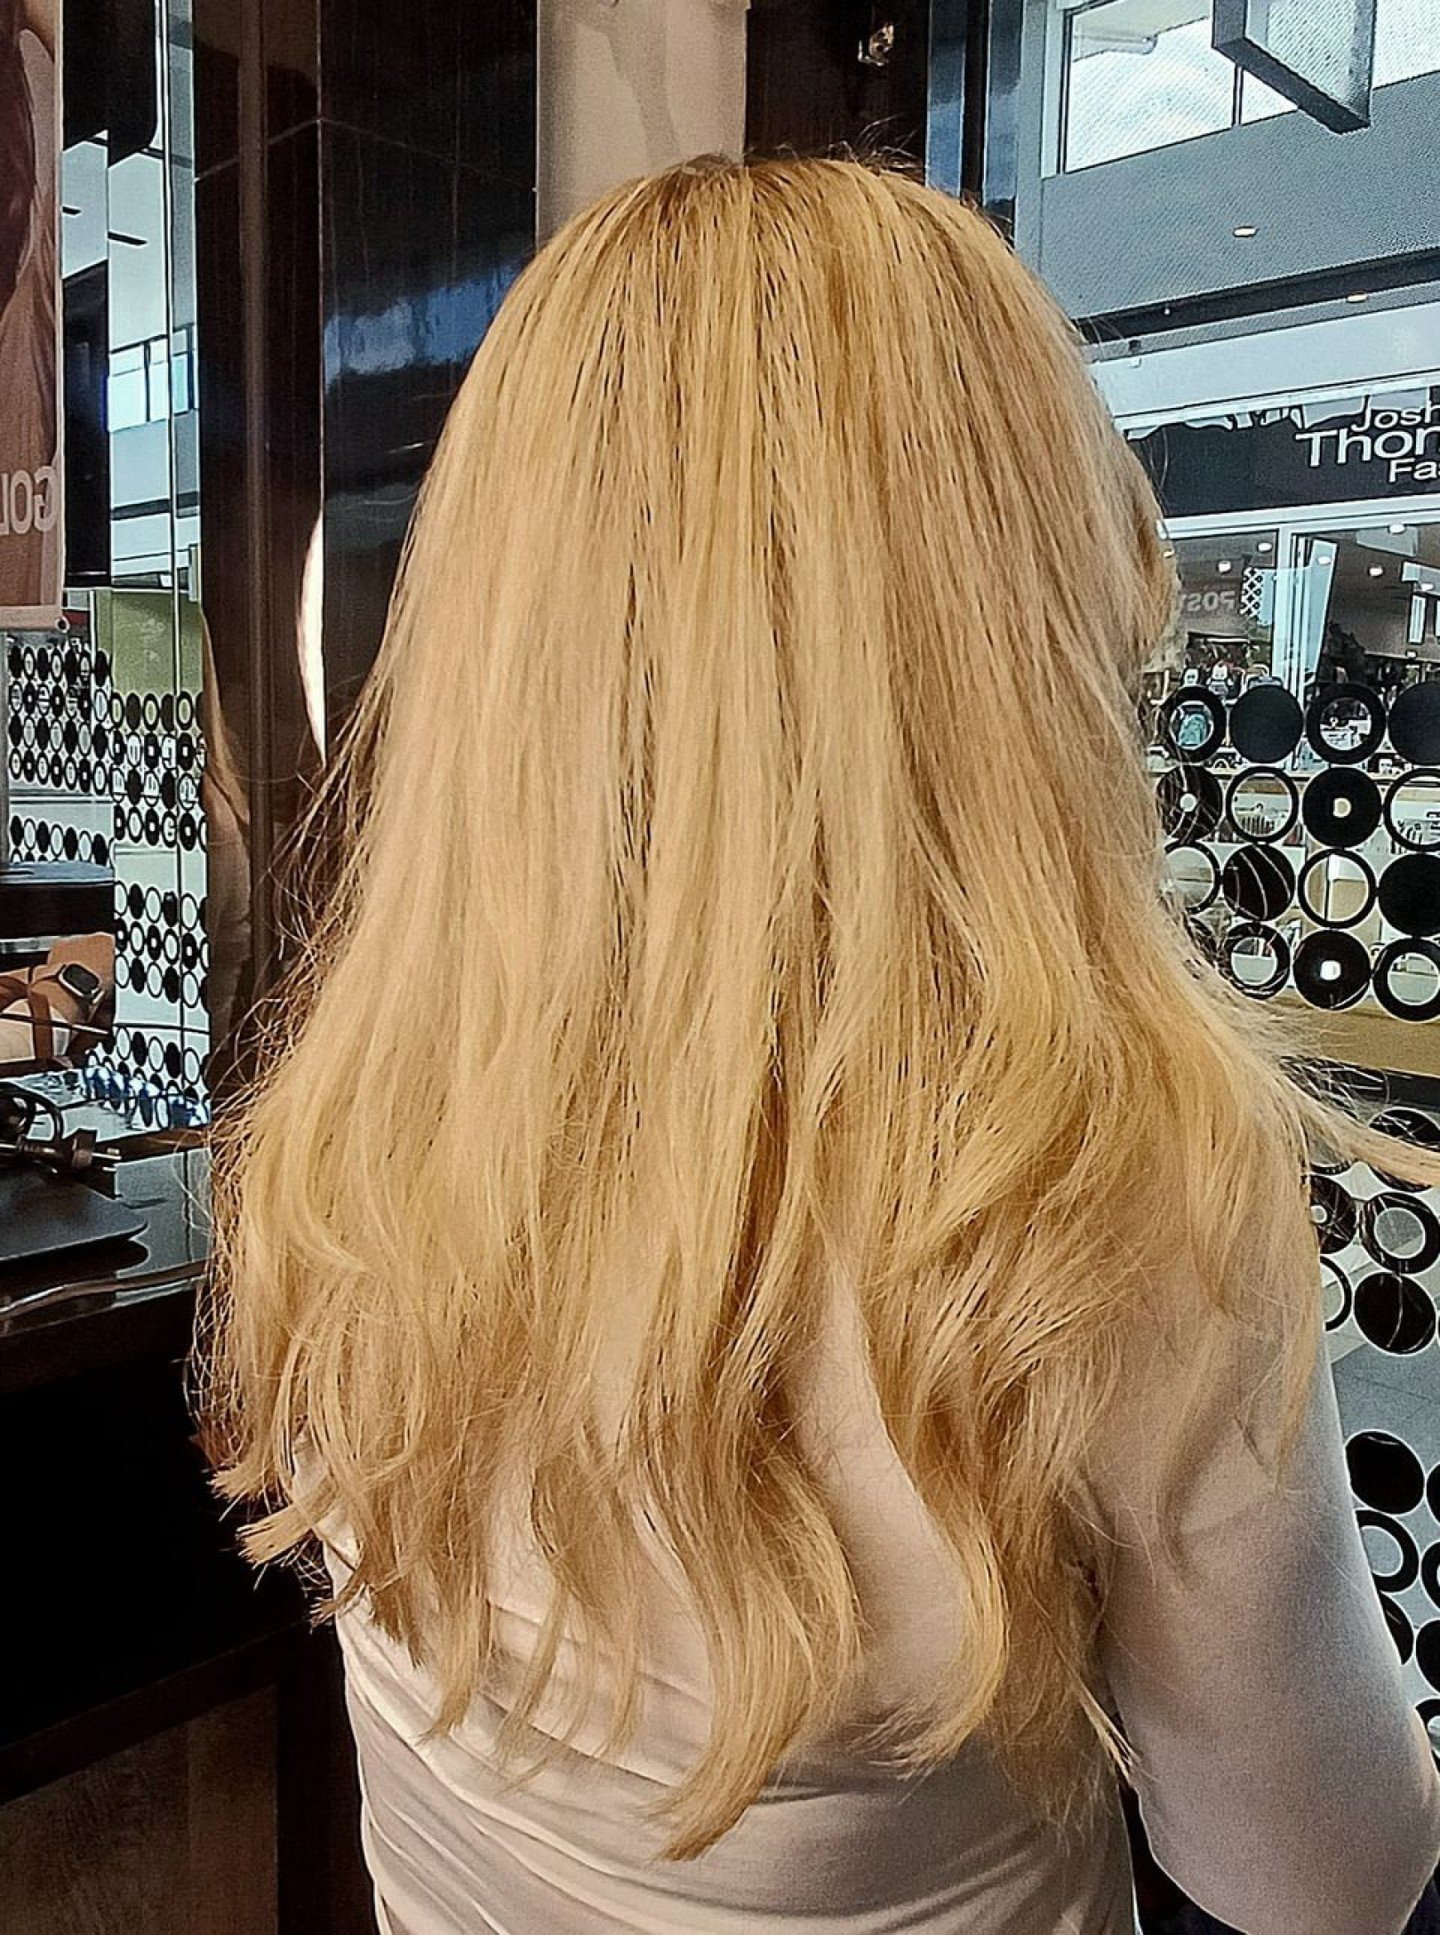 Blonde and Beyond 💛✨

Witness the magic unfold as we turn your hair into luminous blonde brilliance. 

Book an appointment today. Link in bio.